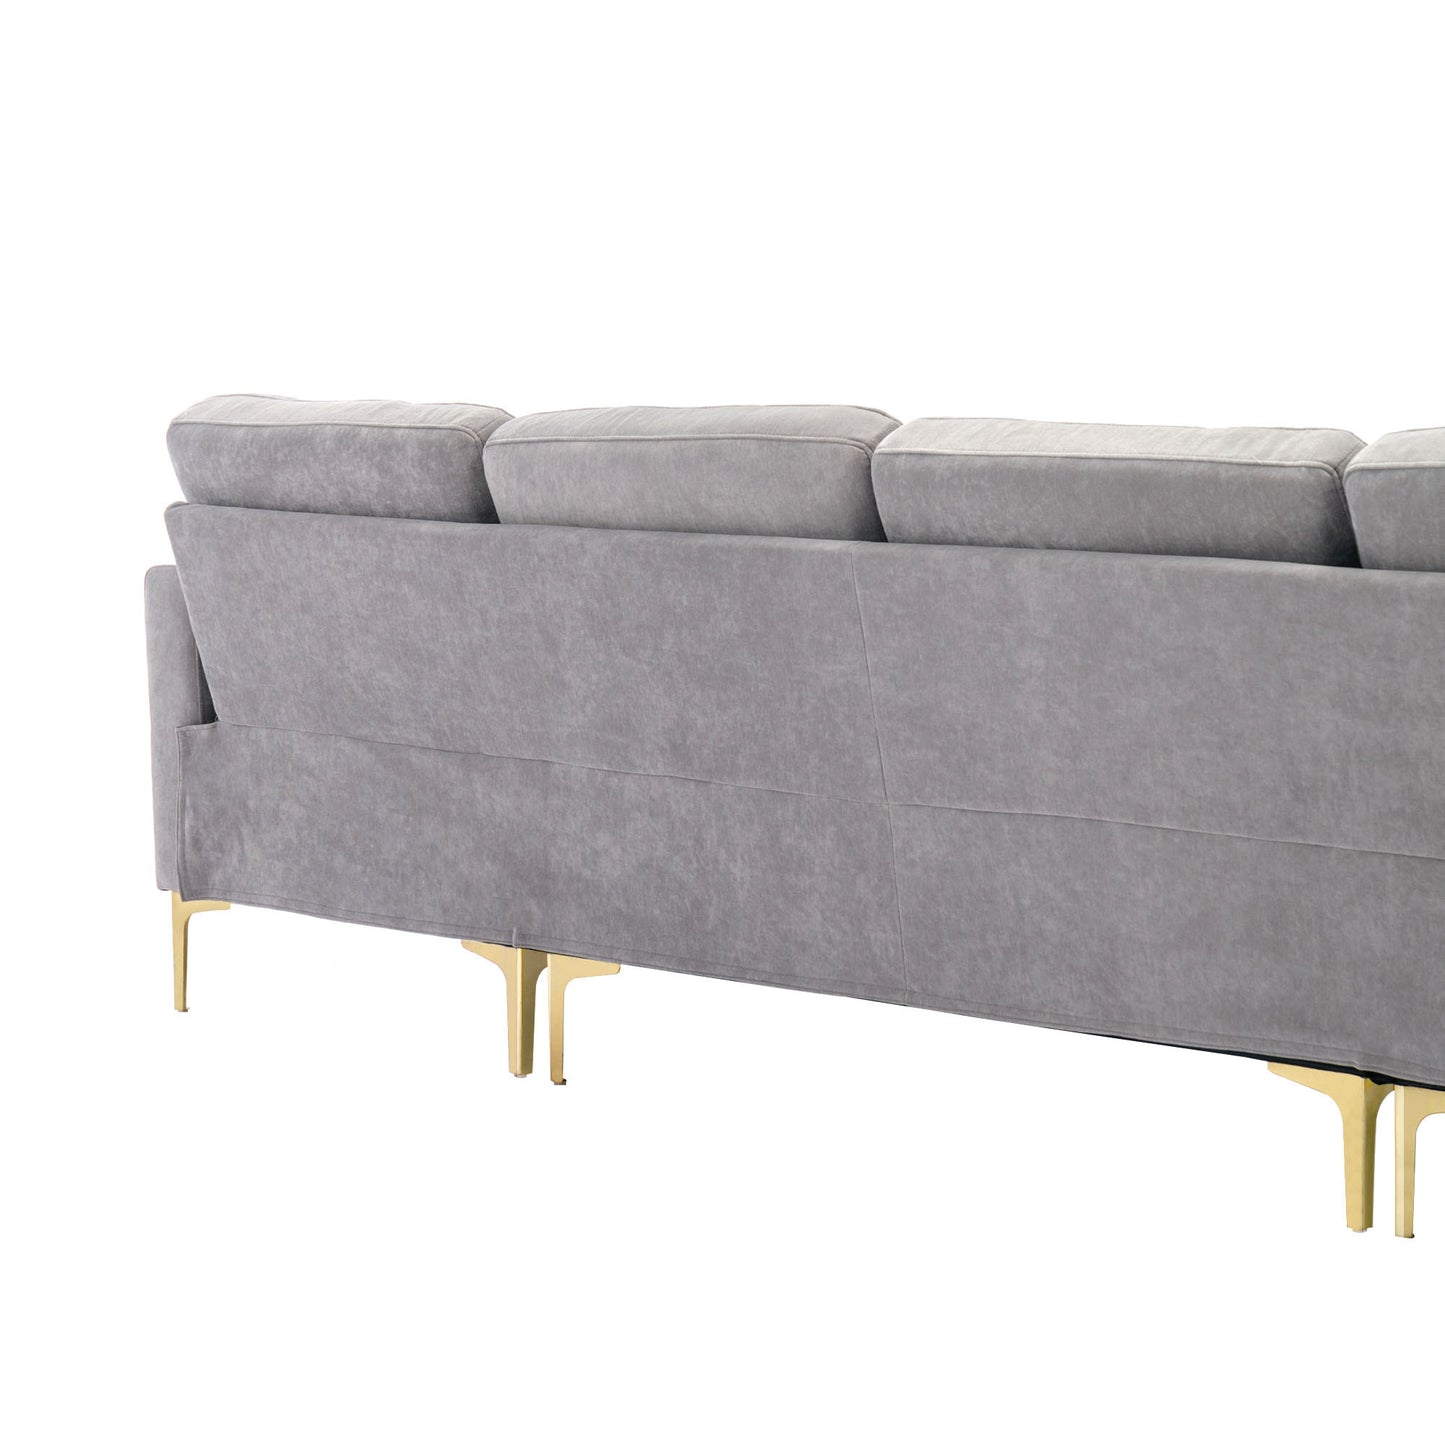 110 Convertible L-Shaped Sectional Sofa with Ottoman in Light Grey